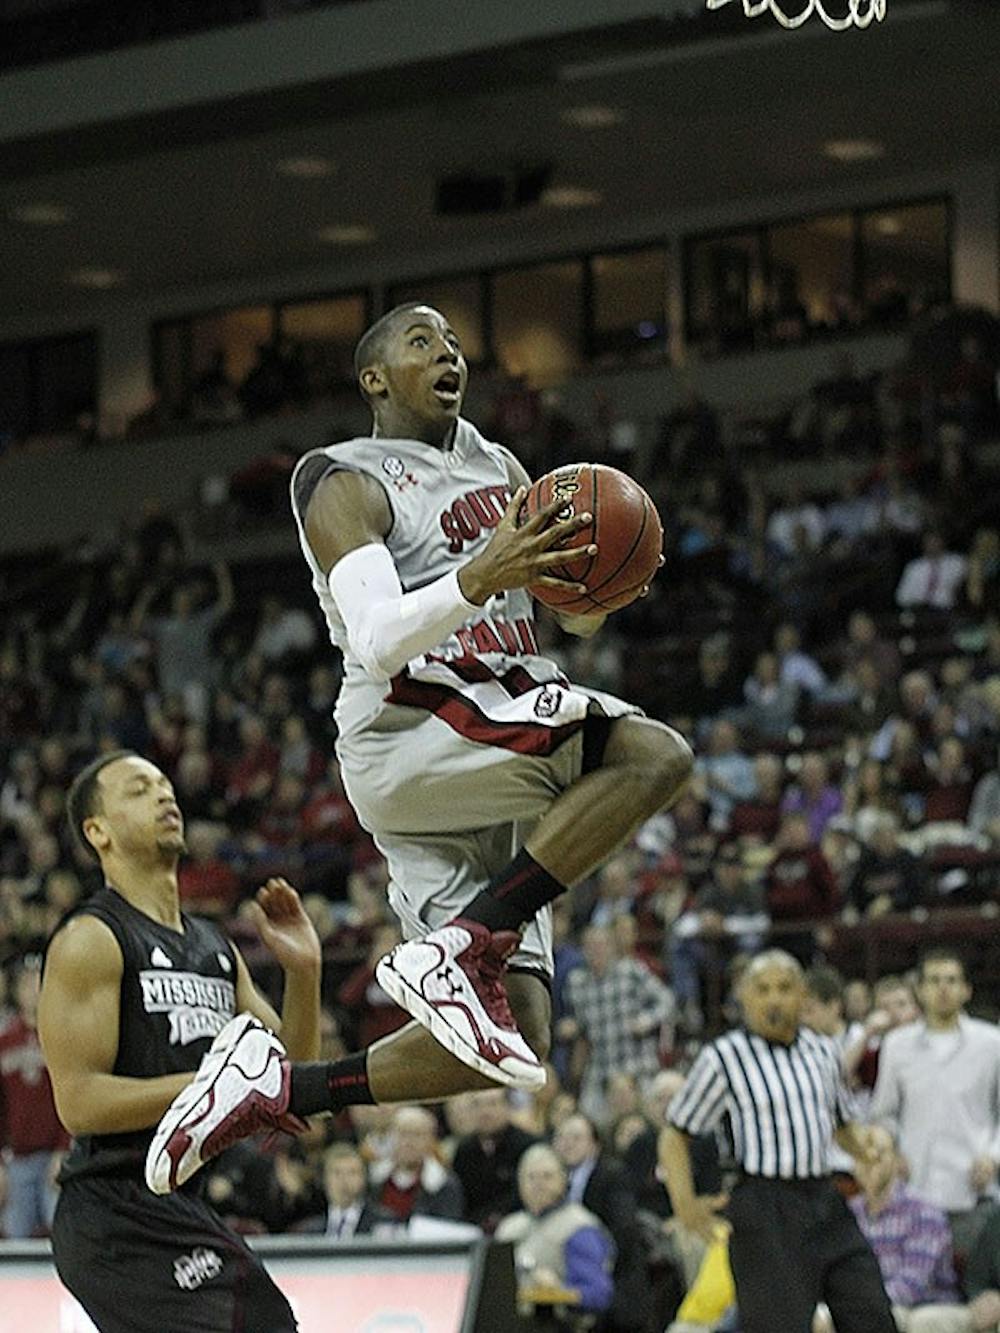 Junior guard Brenton Williams scored 38 points against Mississippi State Wednesday on 10-17 shooting.